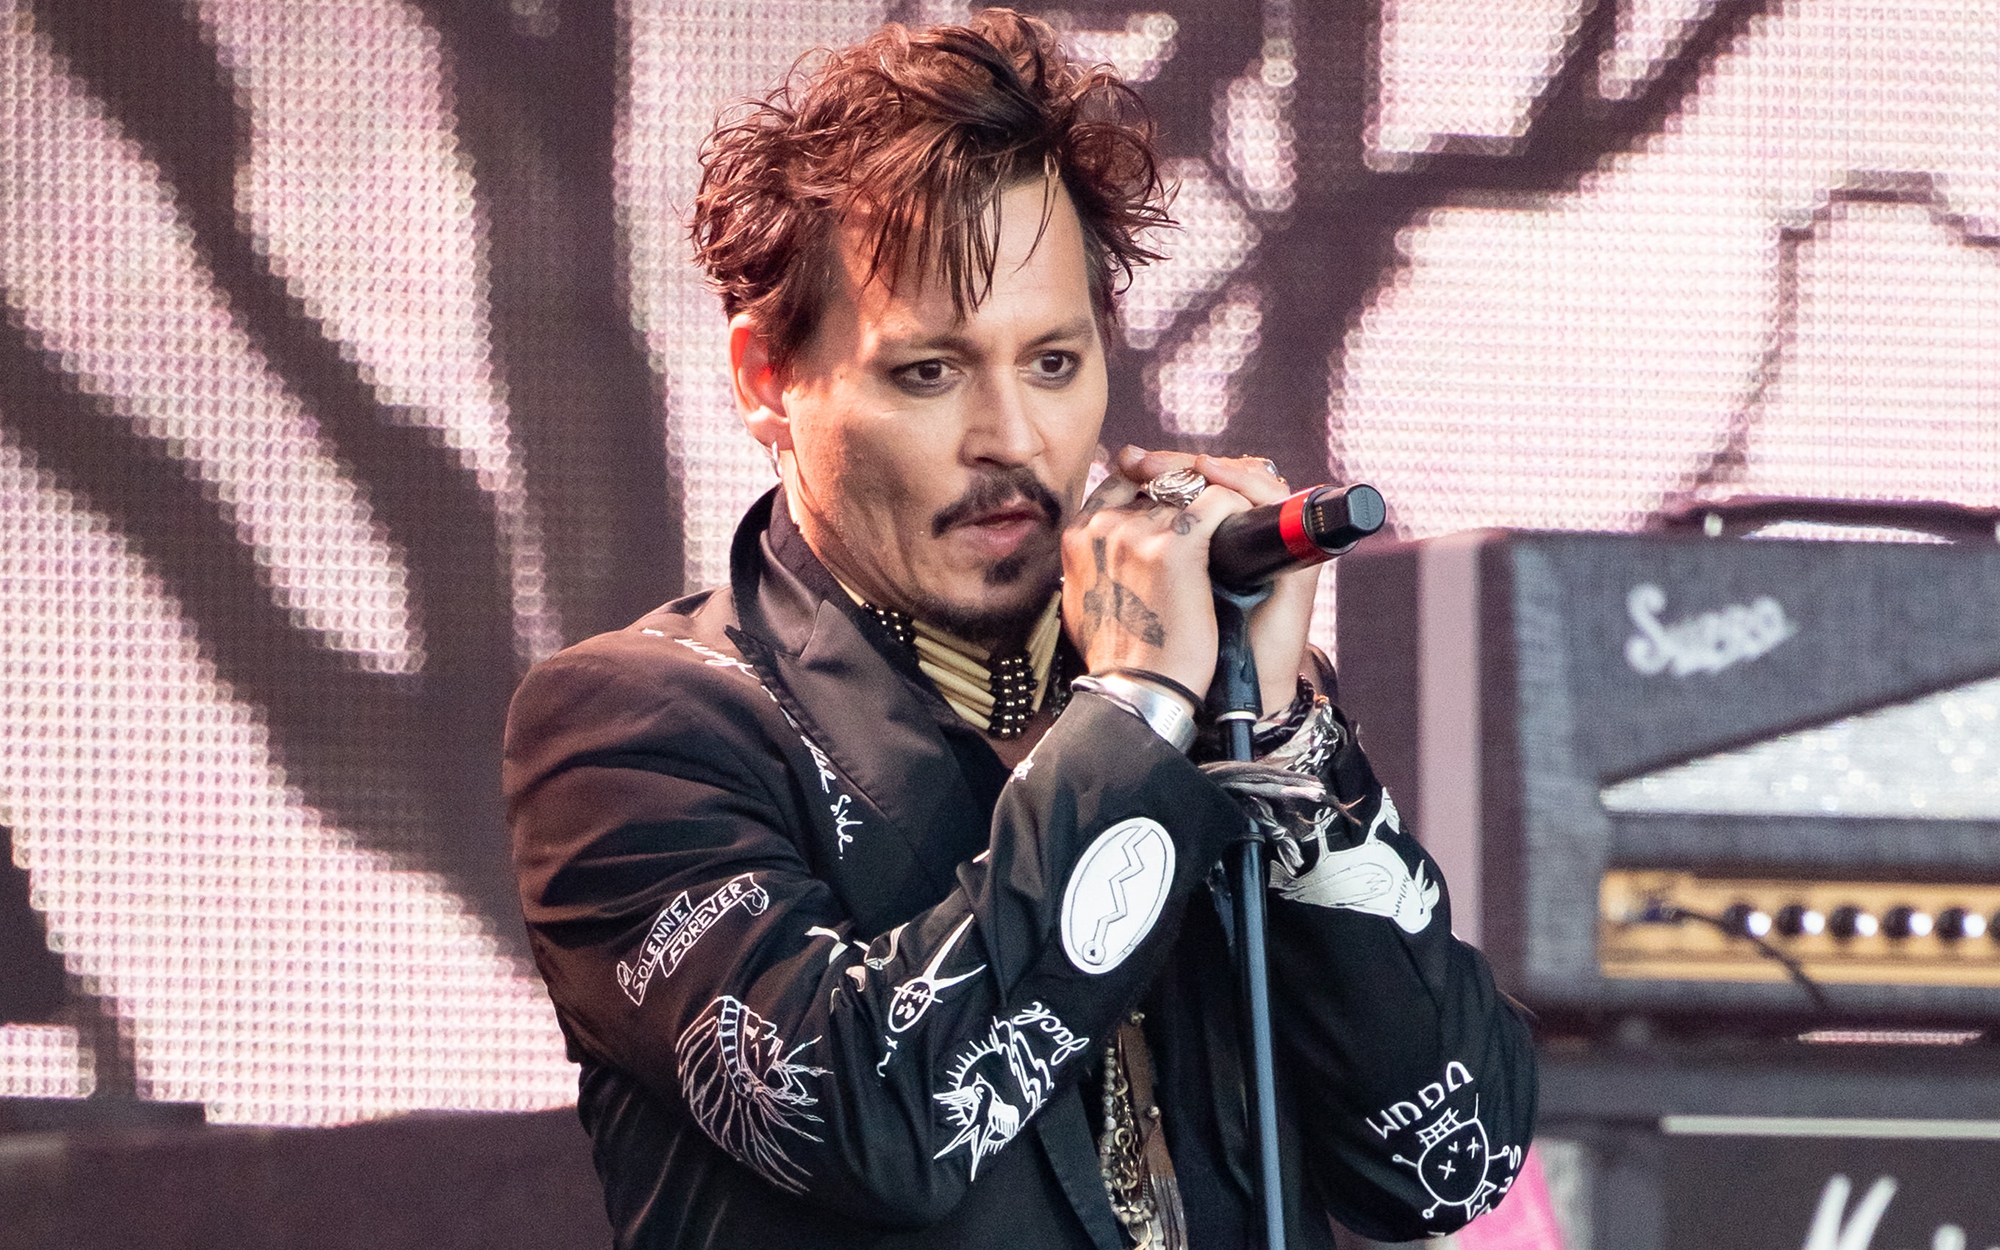 Johnny Depp sings on stage in the middle of a “storm” of lawsuits